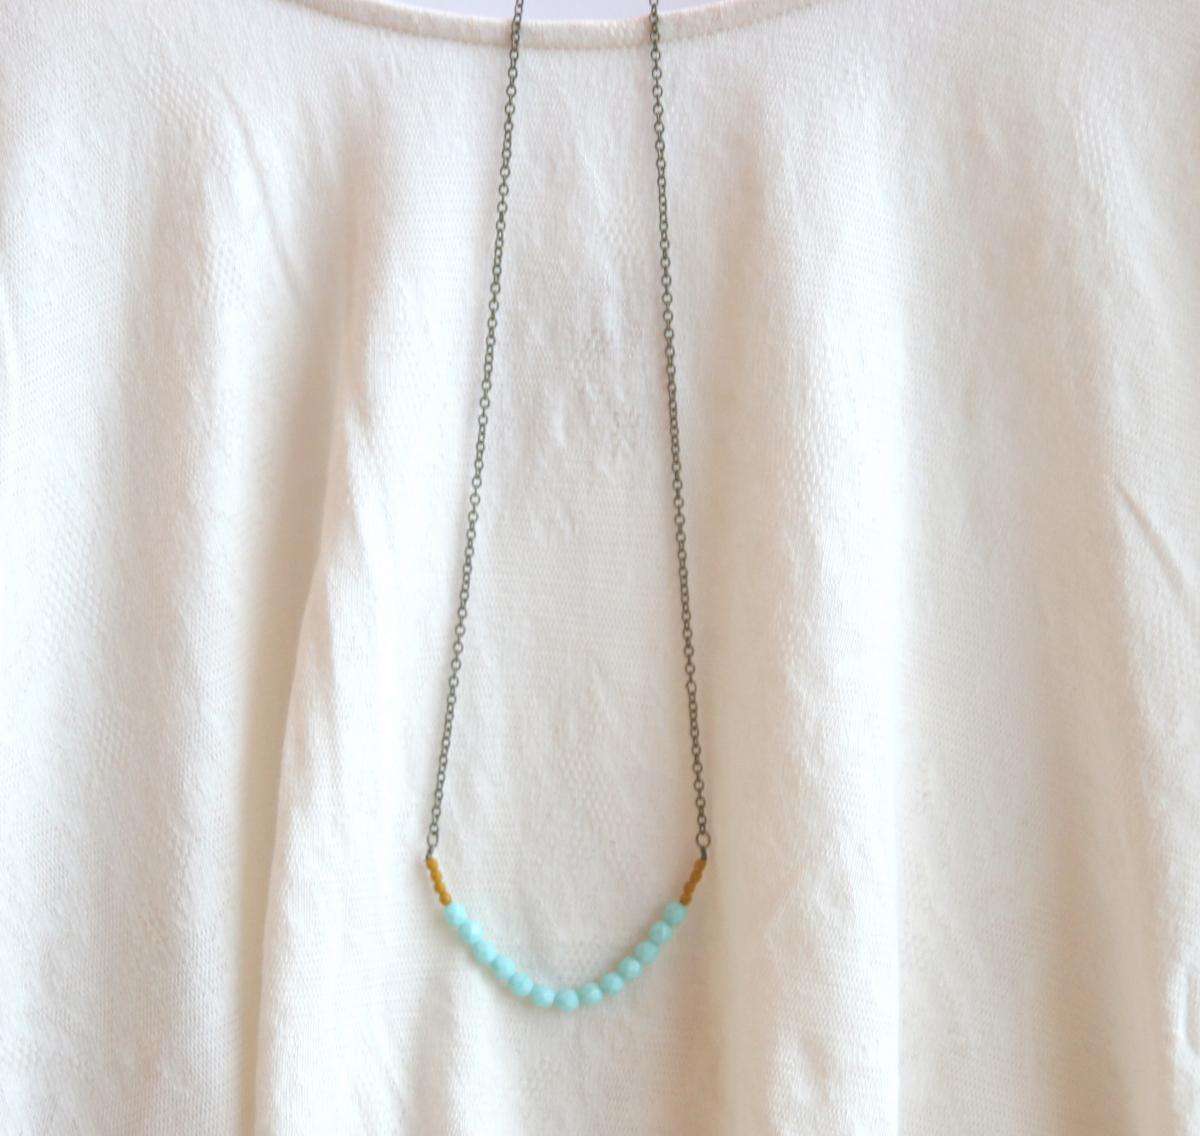 Mustard Yellow Glass Czech Bead Necklace // Turquoise Bead Necklace // Bridesmaid Gifts // Bohemian Necklace